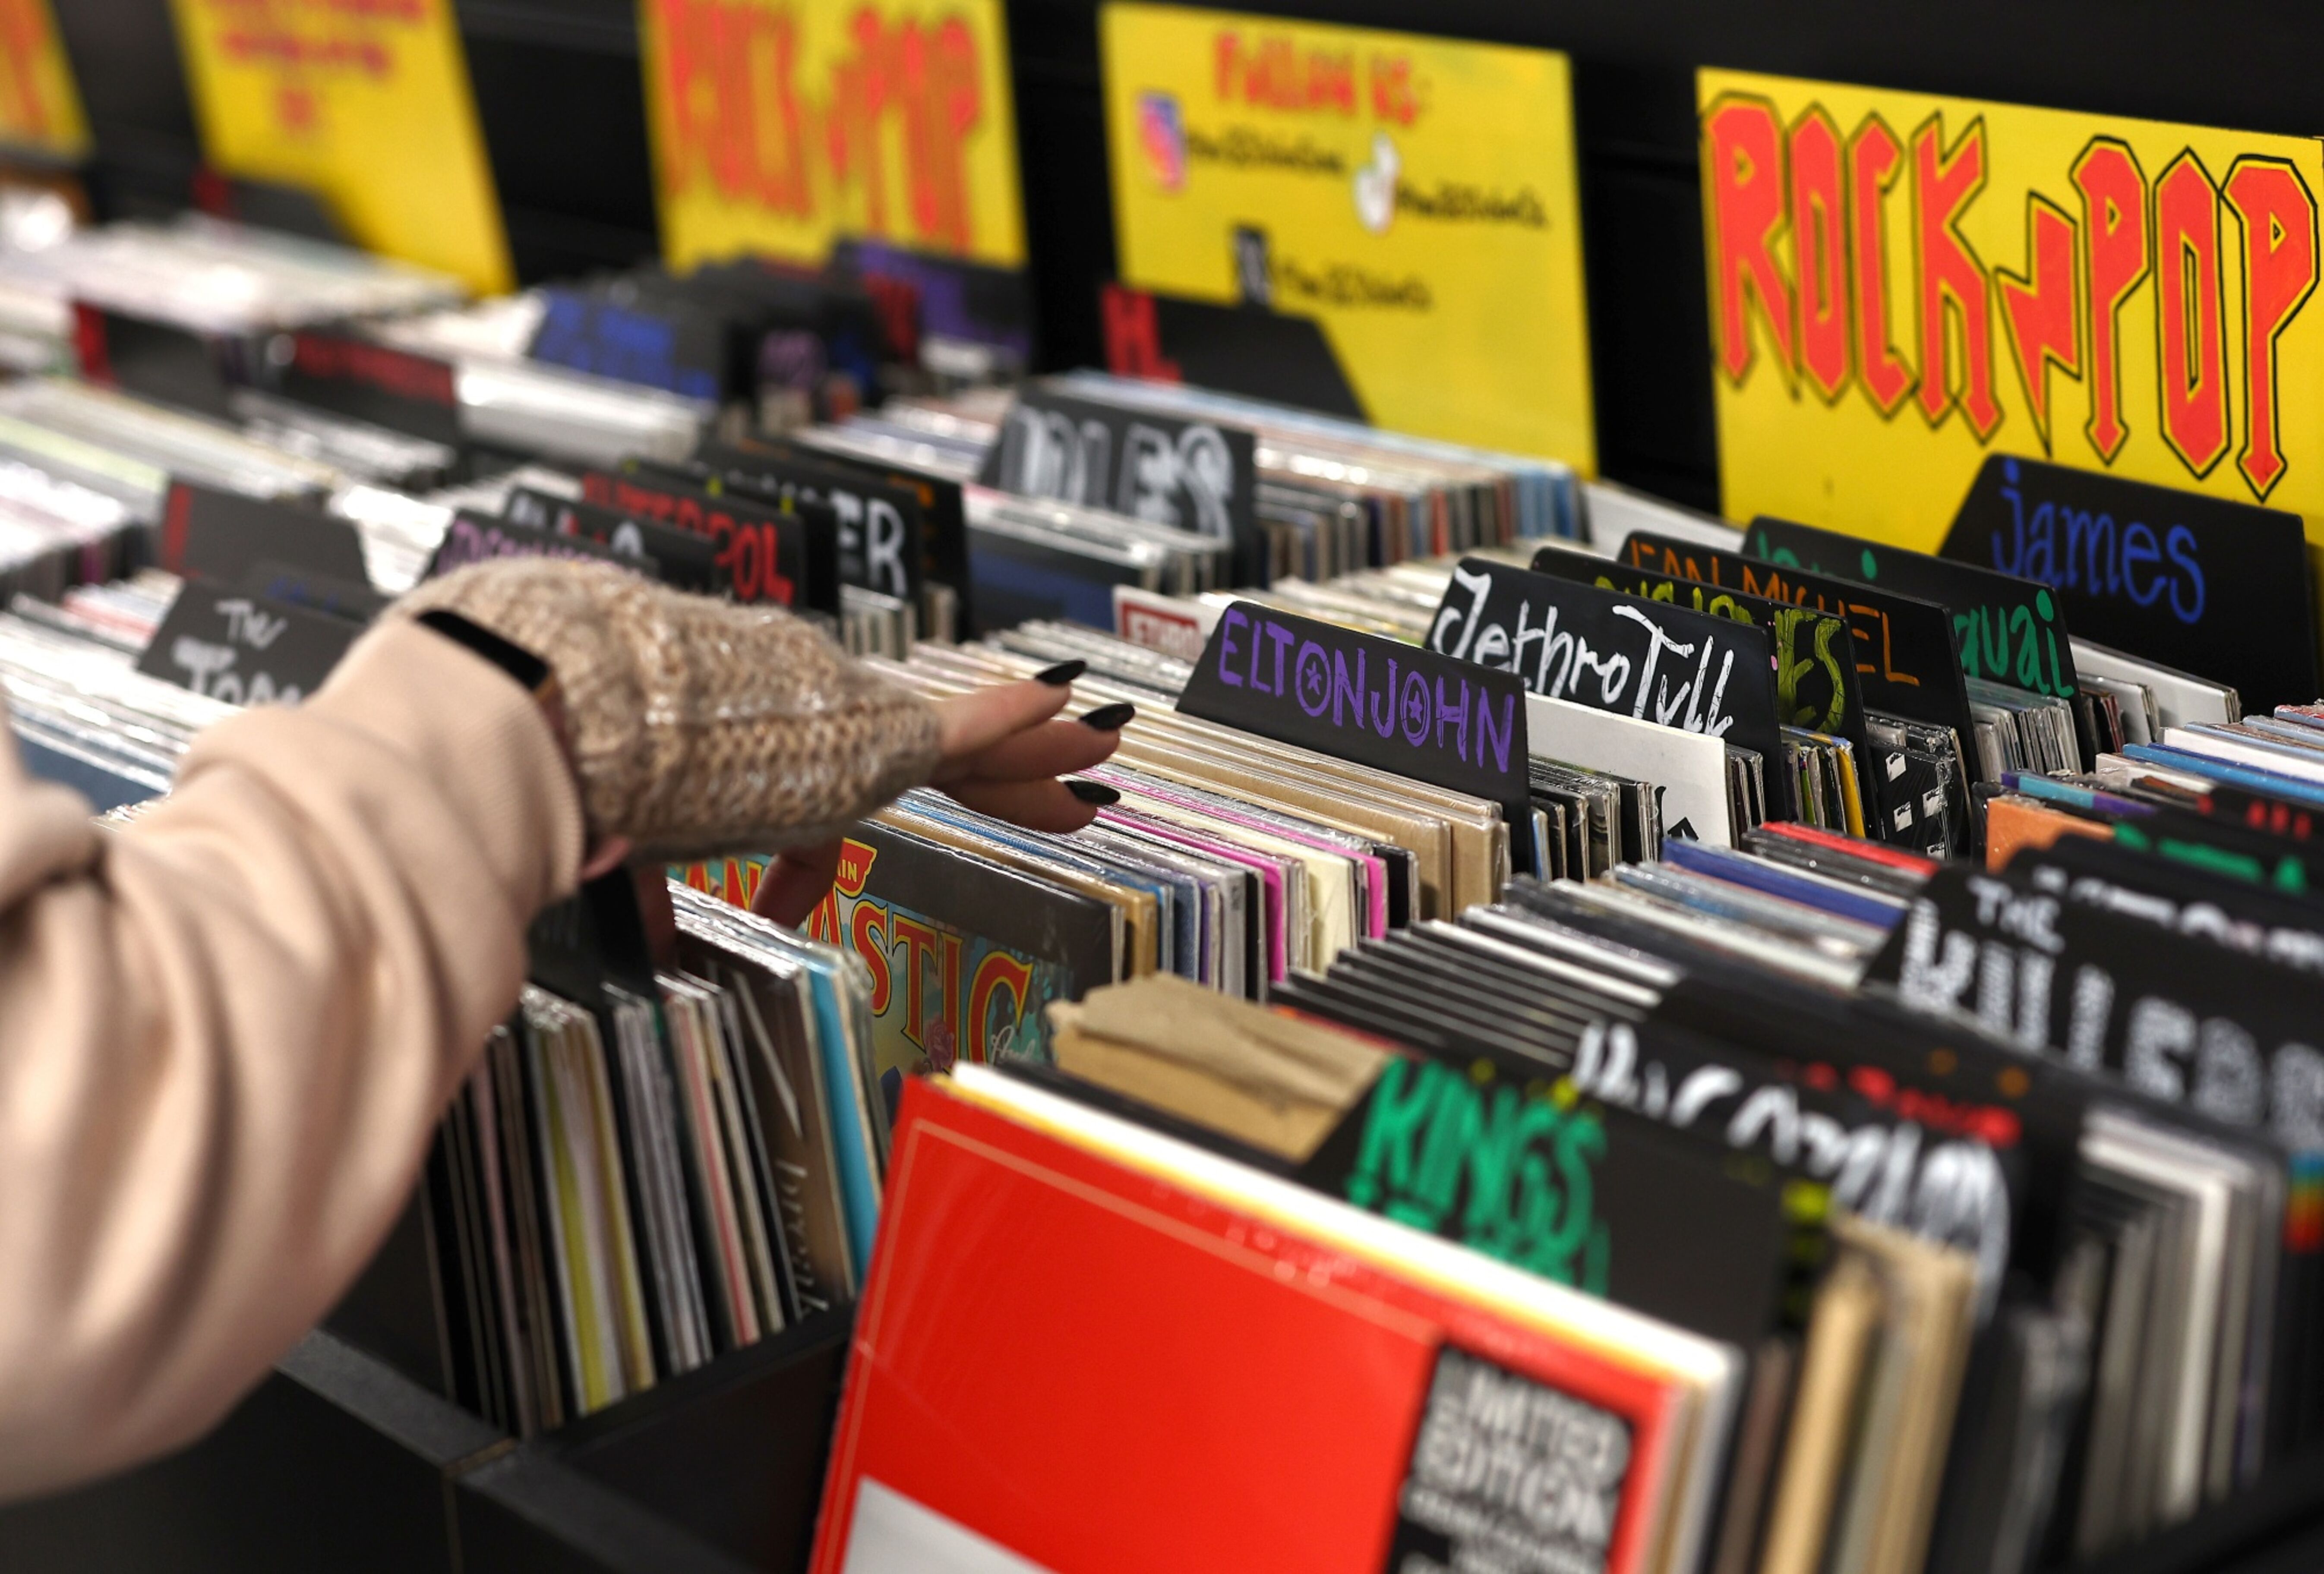 A customer browses records at the HMV store on Oxford Street in London. Photographer: Peter Nicholls/Getty Images